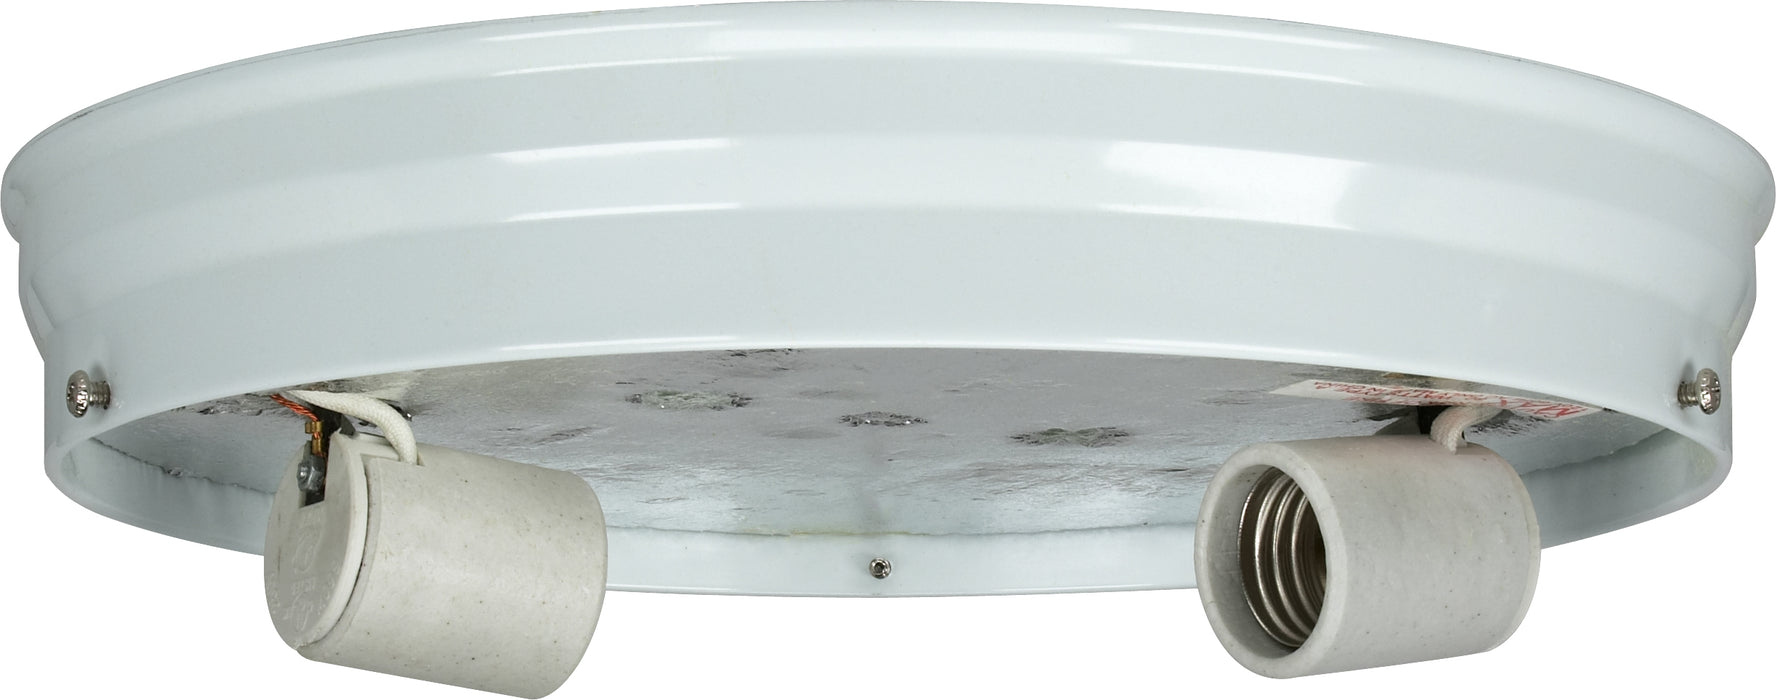 SATCO/NUVO 10 Inch 2-Light Ceiling Pan White Finish Includes Hardware 60W Maximum (90-685)